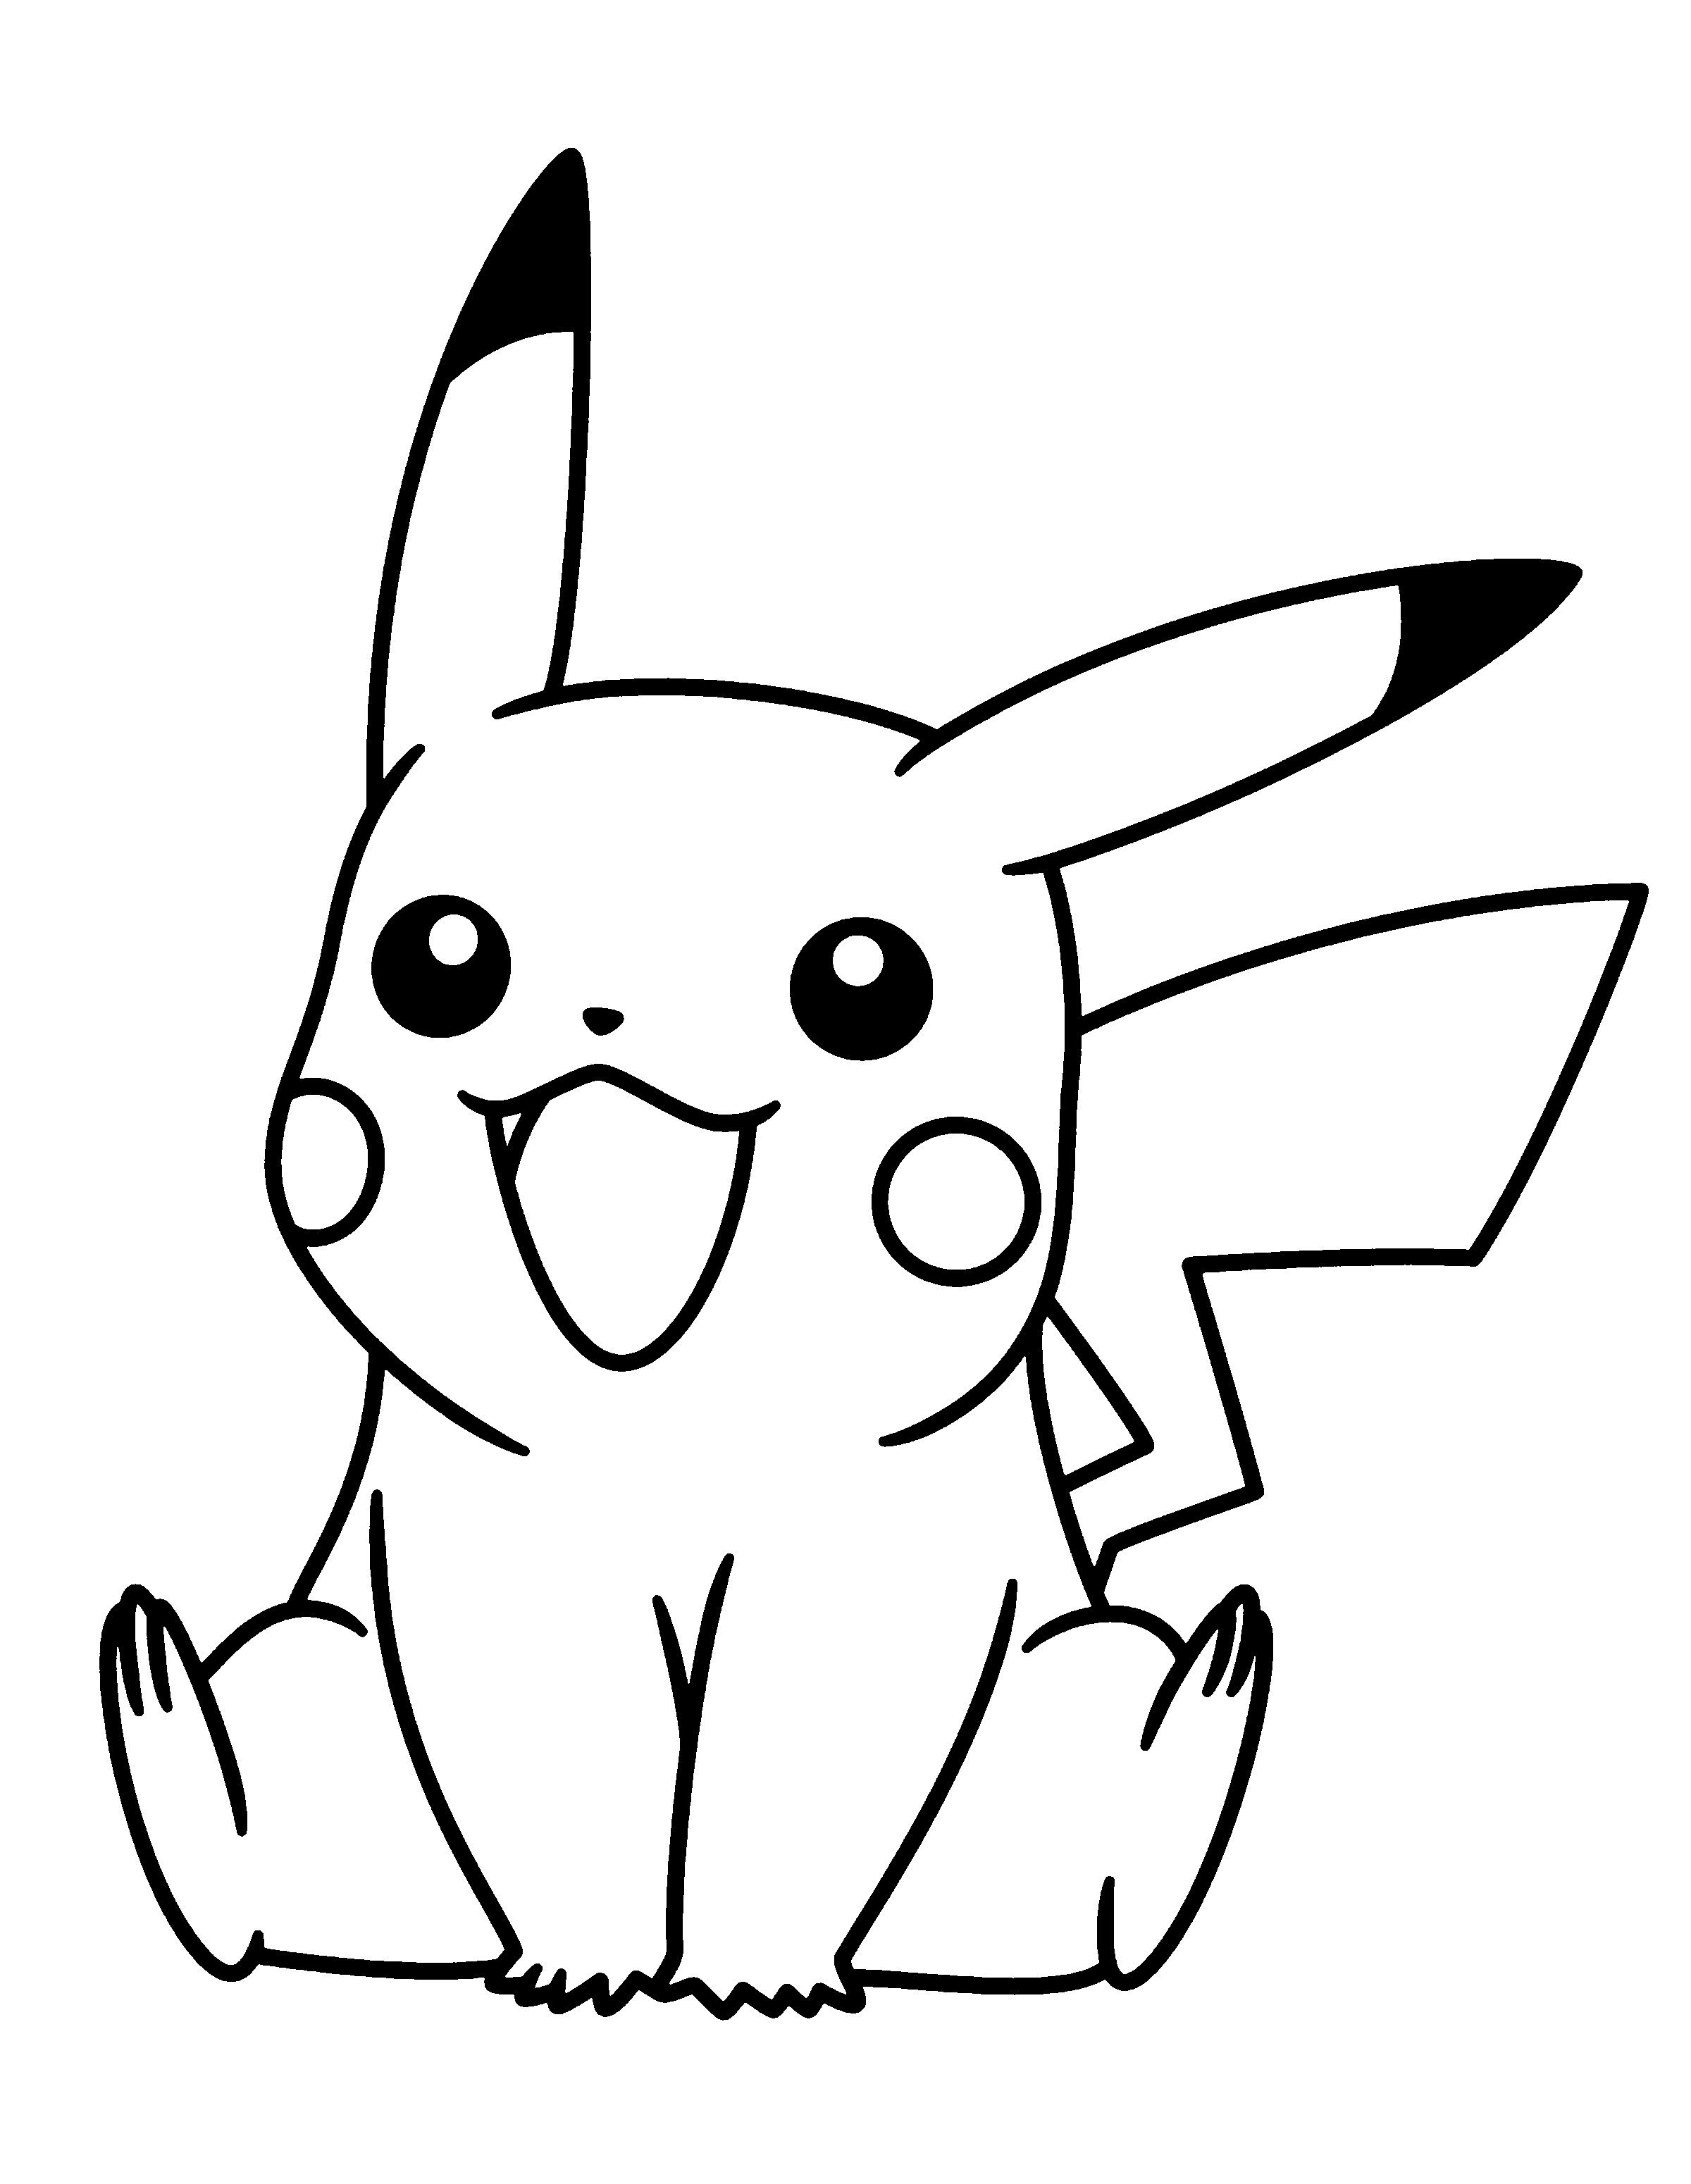 Pikachu Mask Coloring Pages – From the thousands of pictures on the net in  relation to pika… | Pikachu coloring page, Pokemon coloring pages, Cartoon coloring  pages